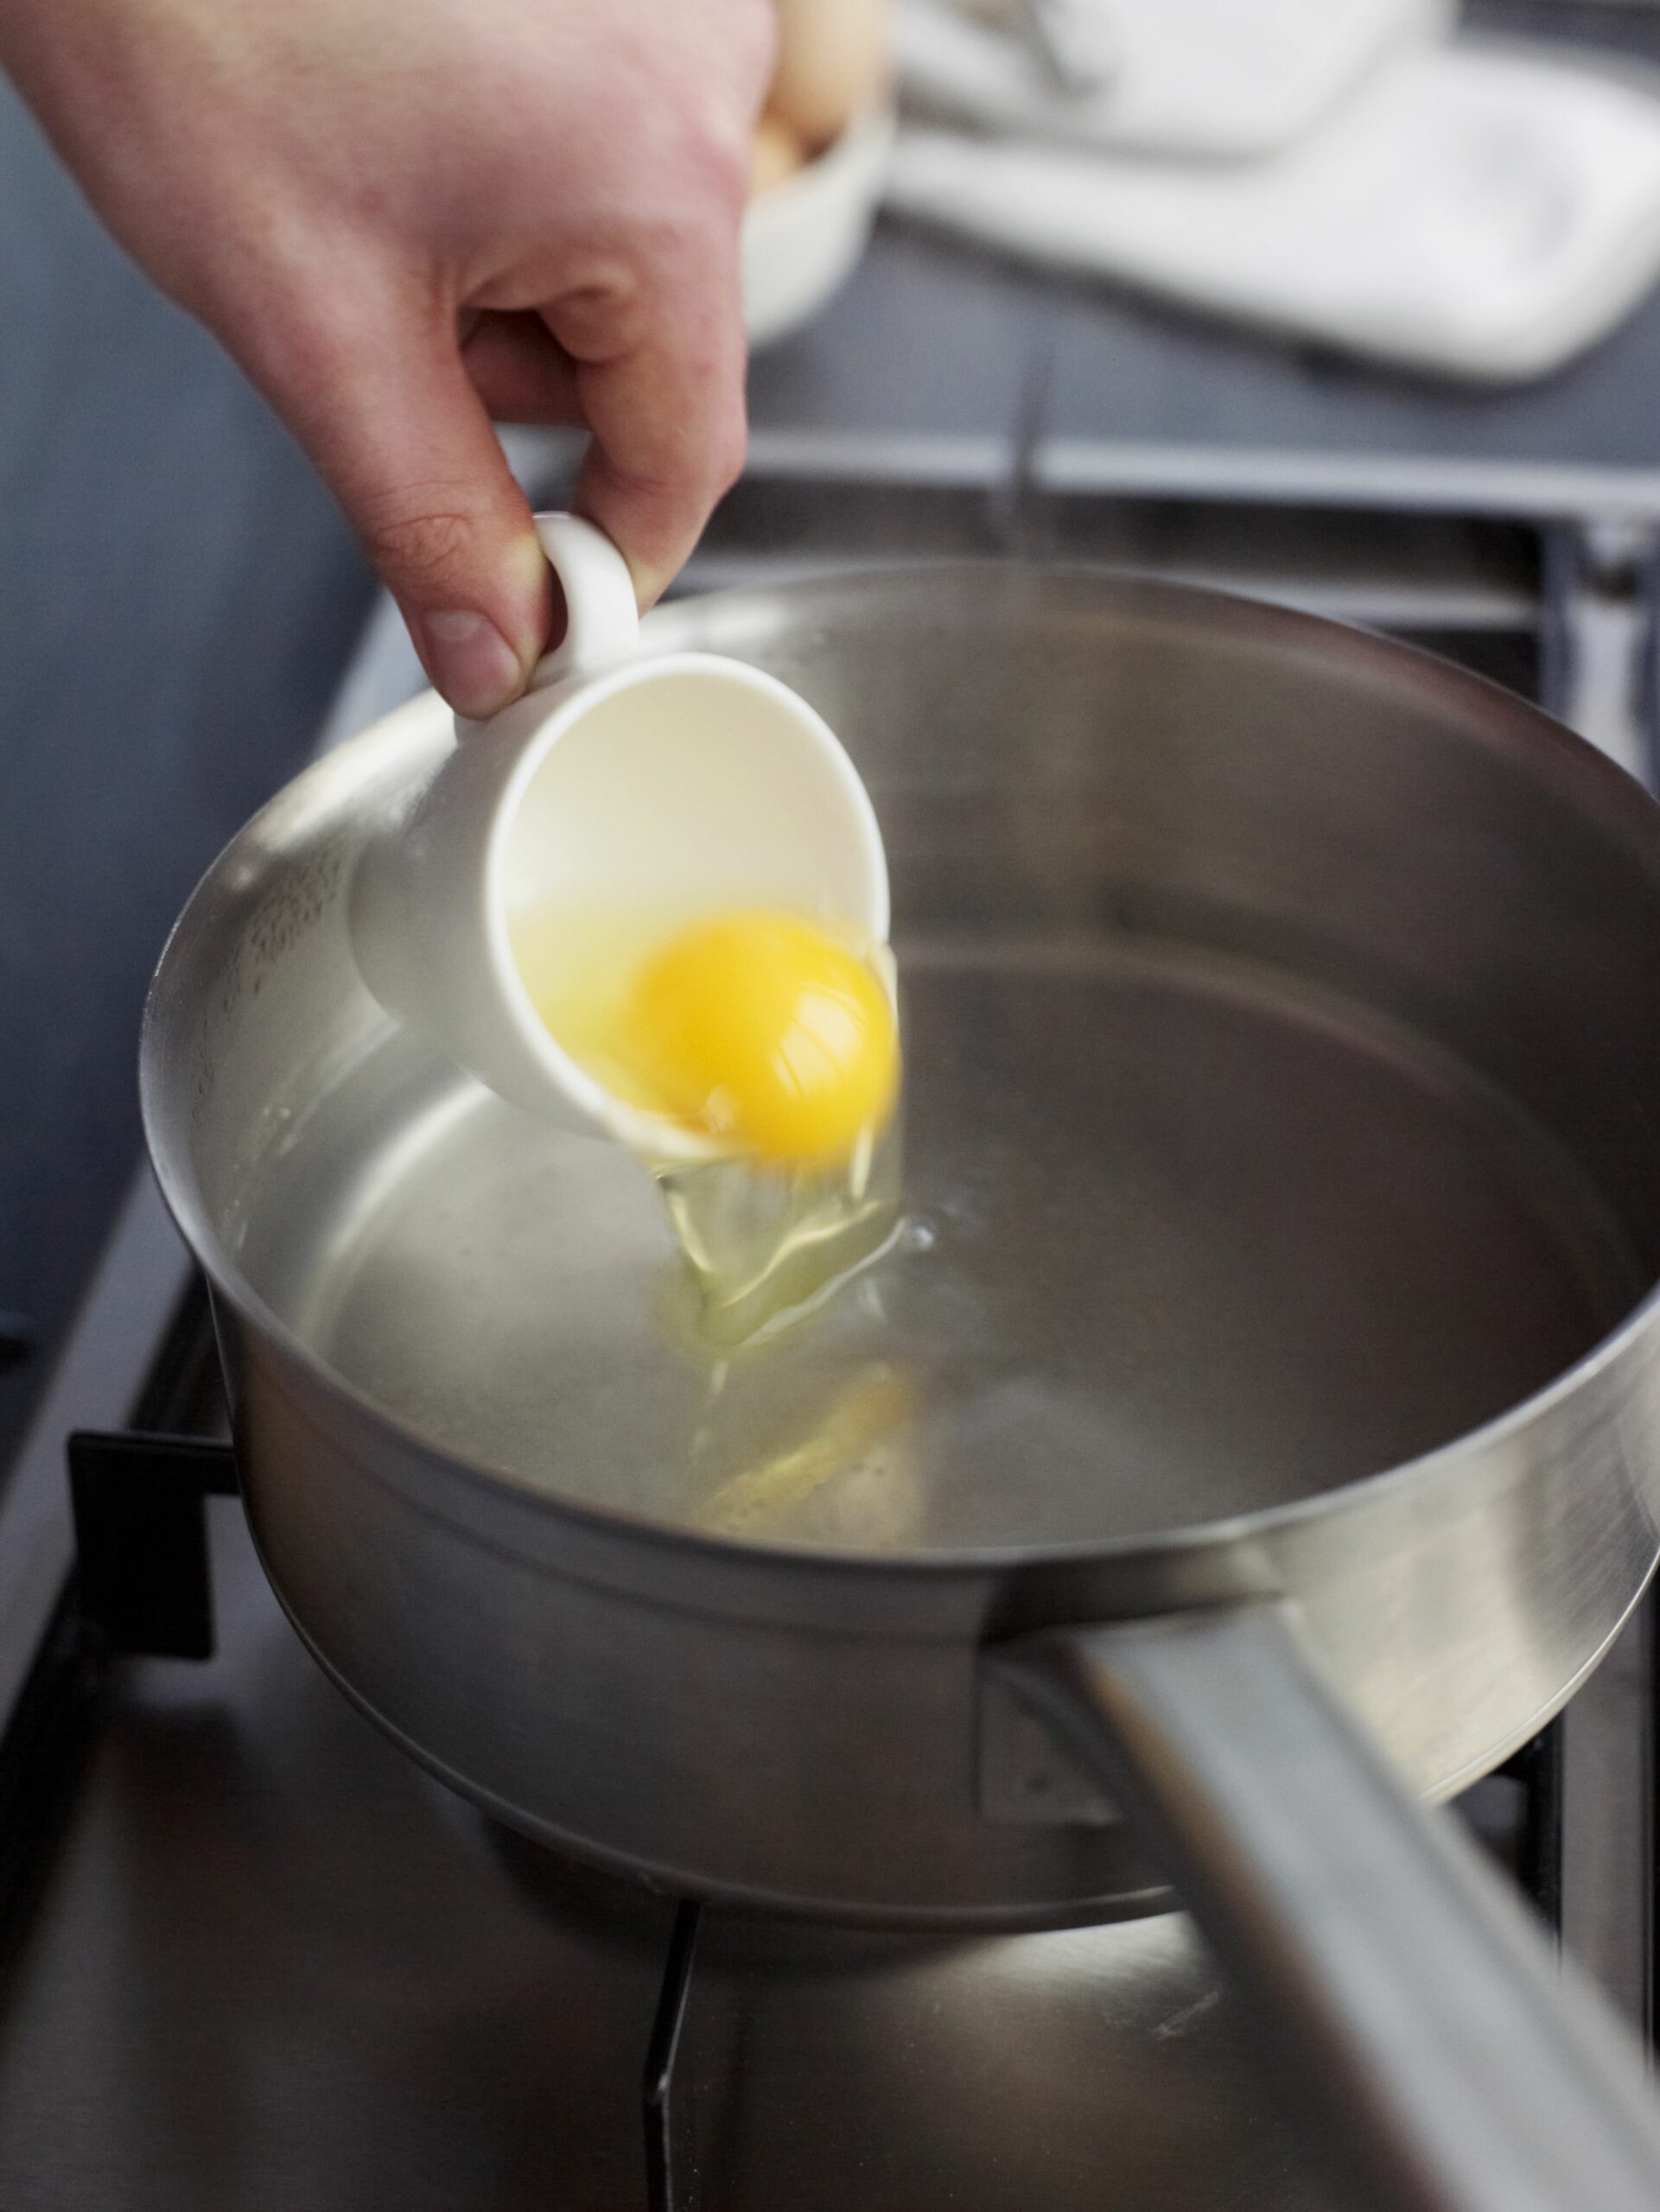 A Delicious Breakfast In Minutes: How To Poach An Egg In 5 Easy Steps